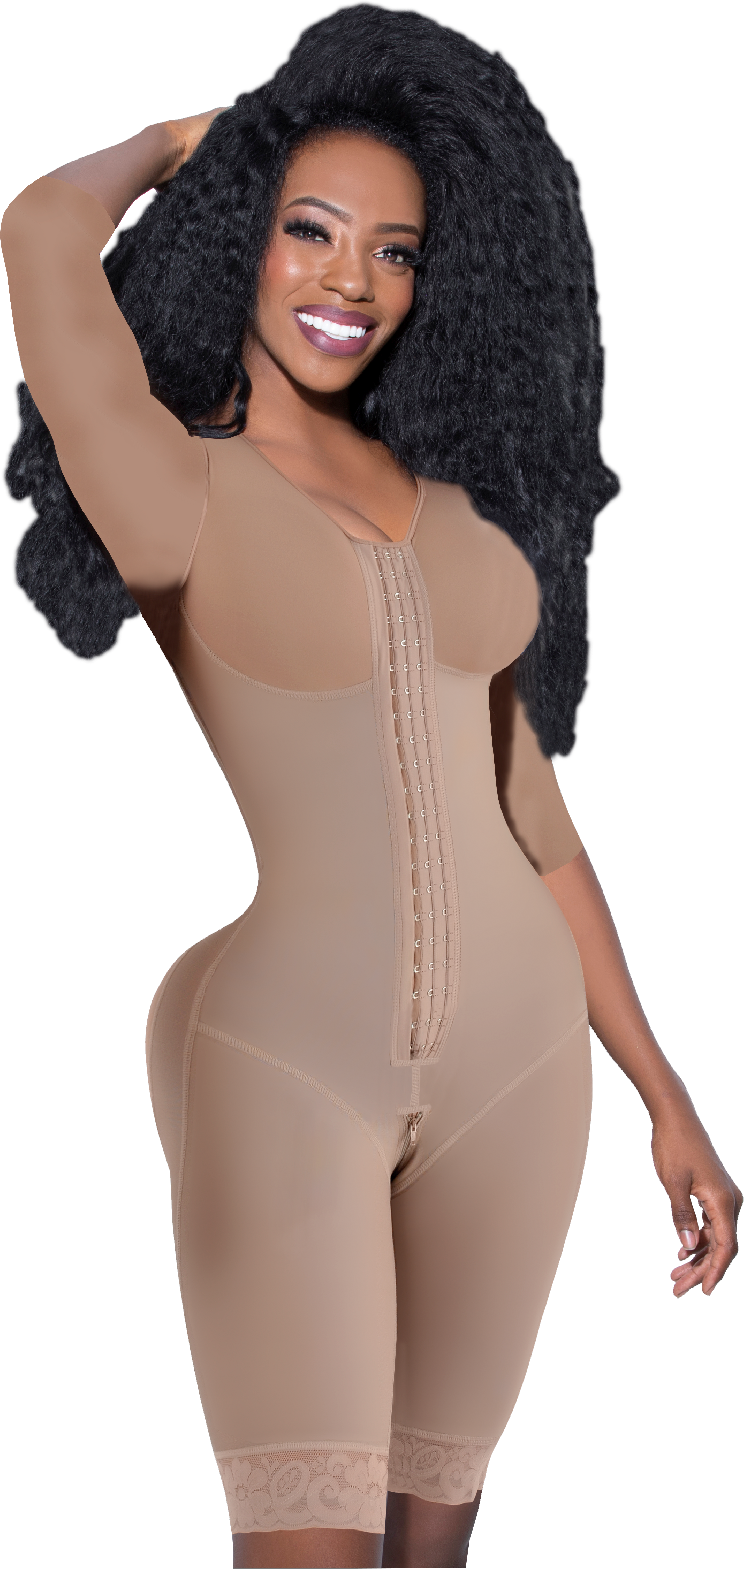 HS53 Colombian SHAPEWEAR, Sleeve and Built-in Bra, Daily Use